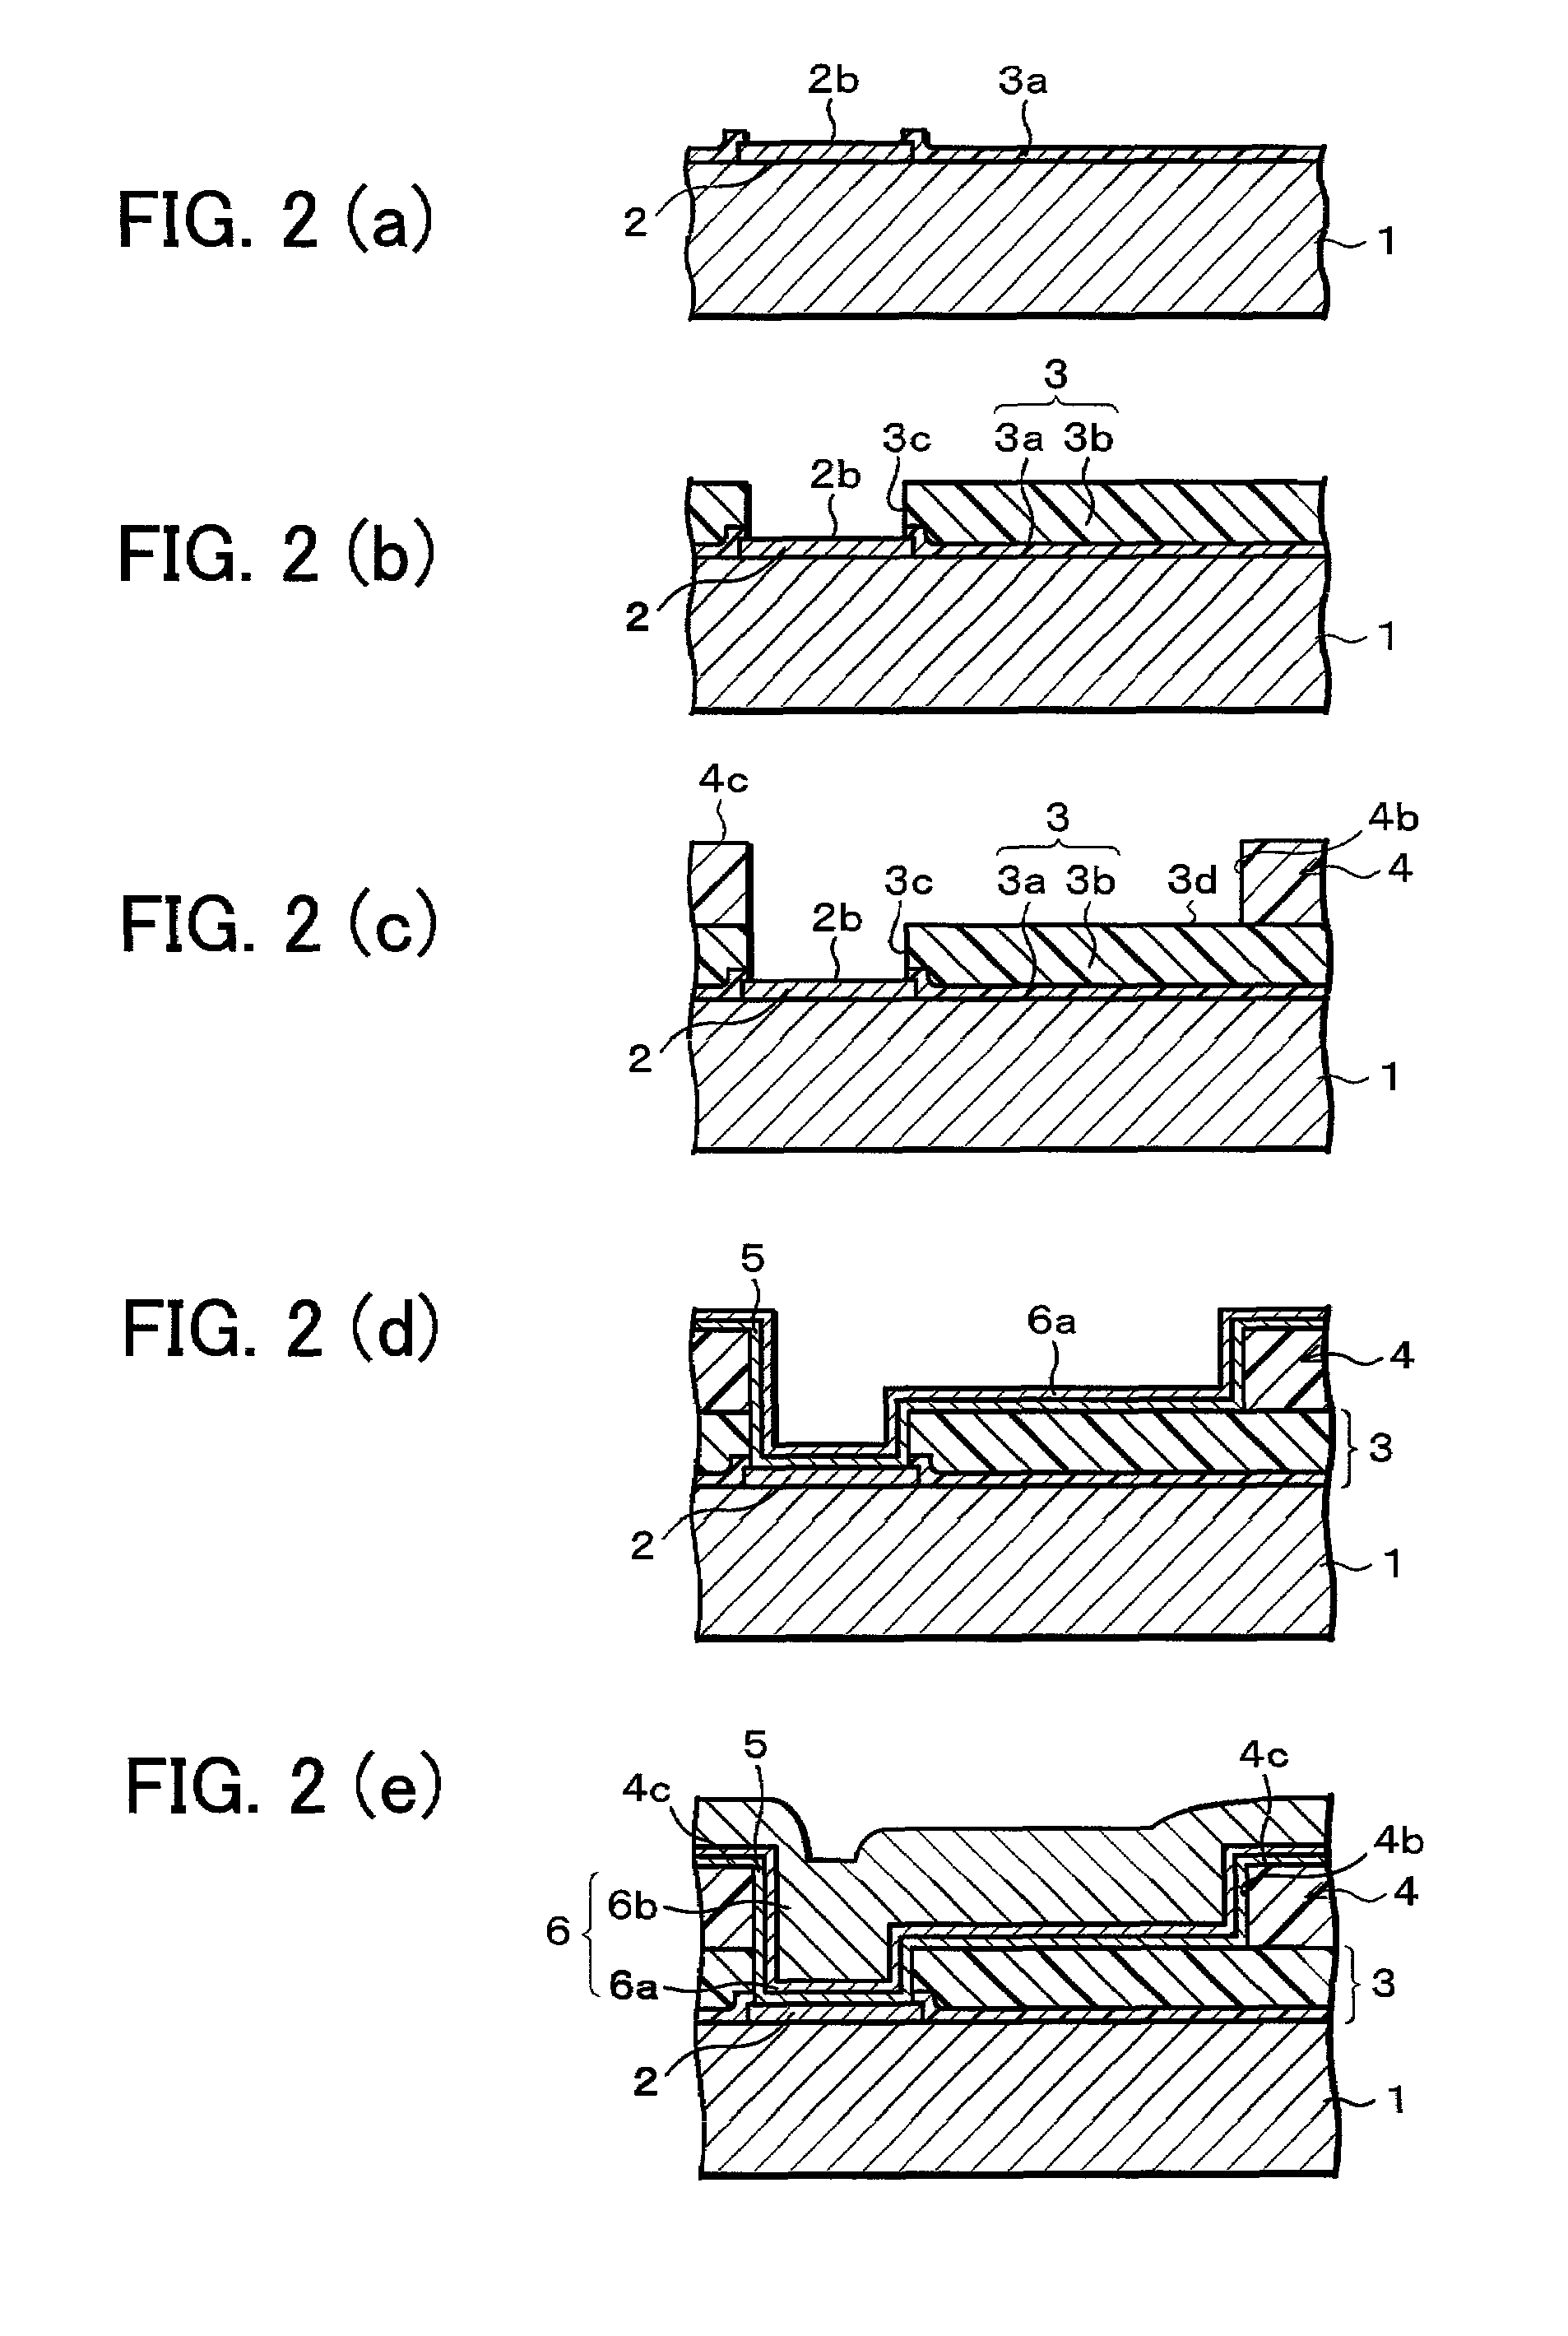 Semiconductor device having a leading wiring layer